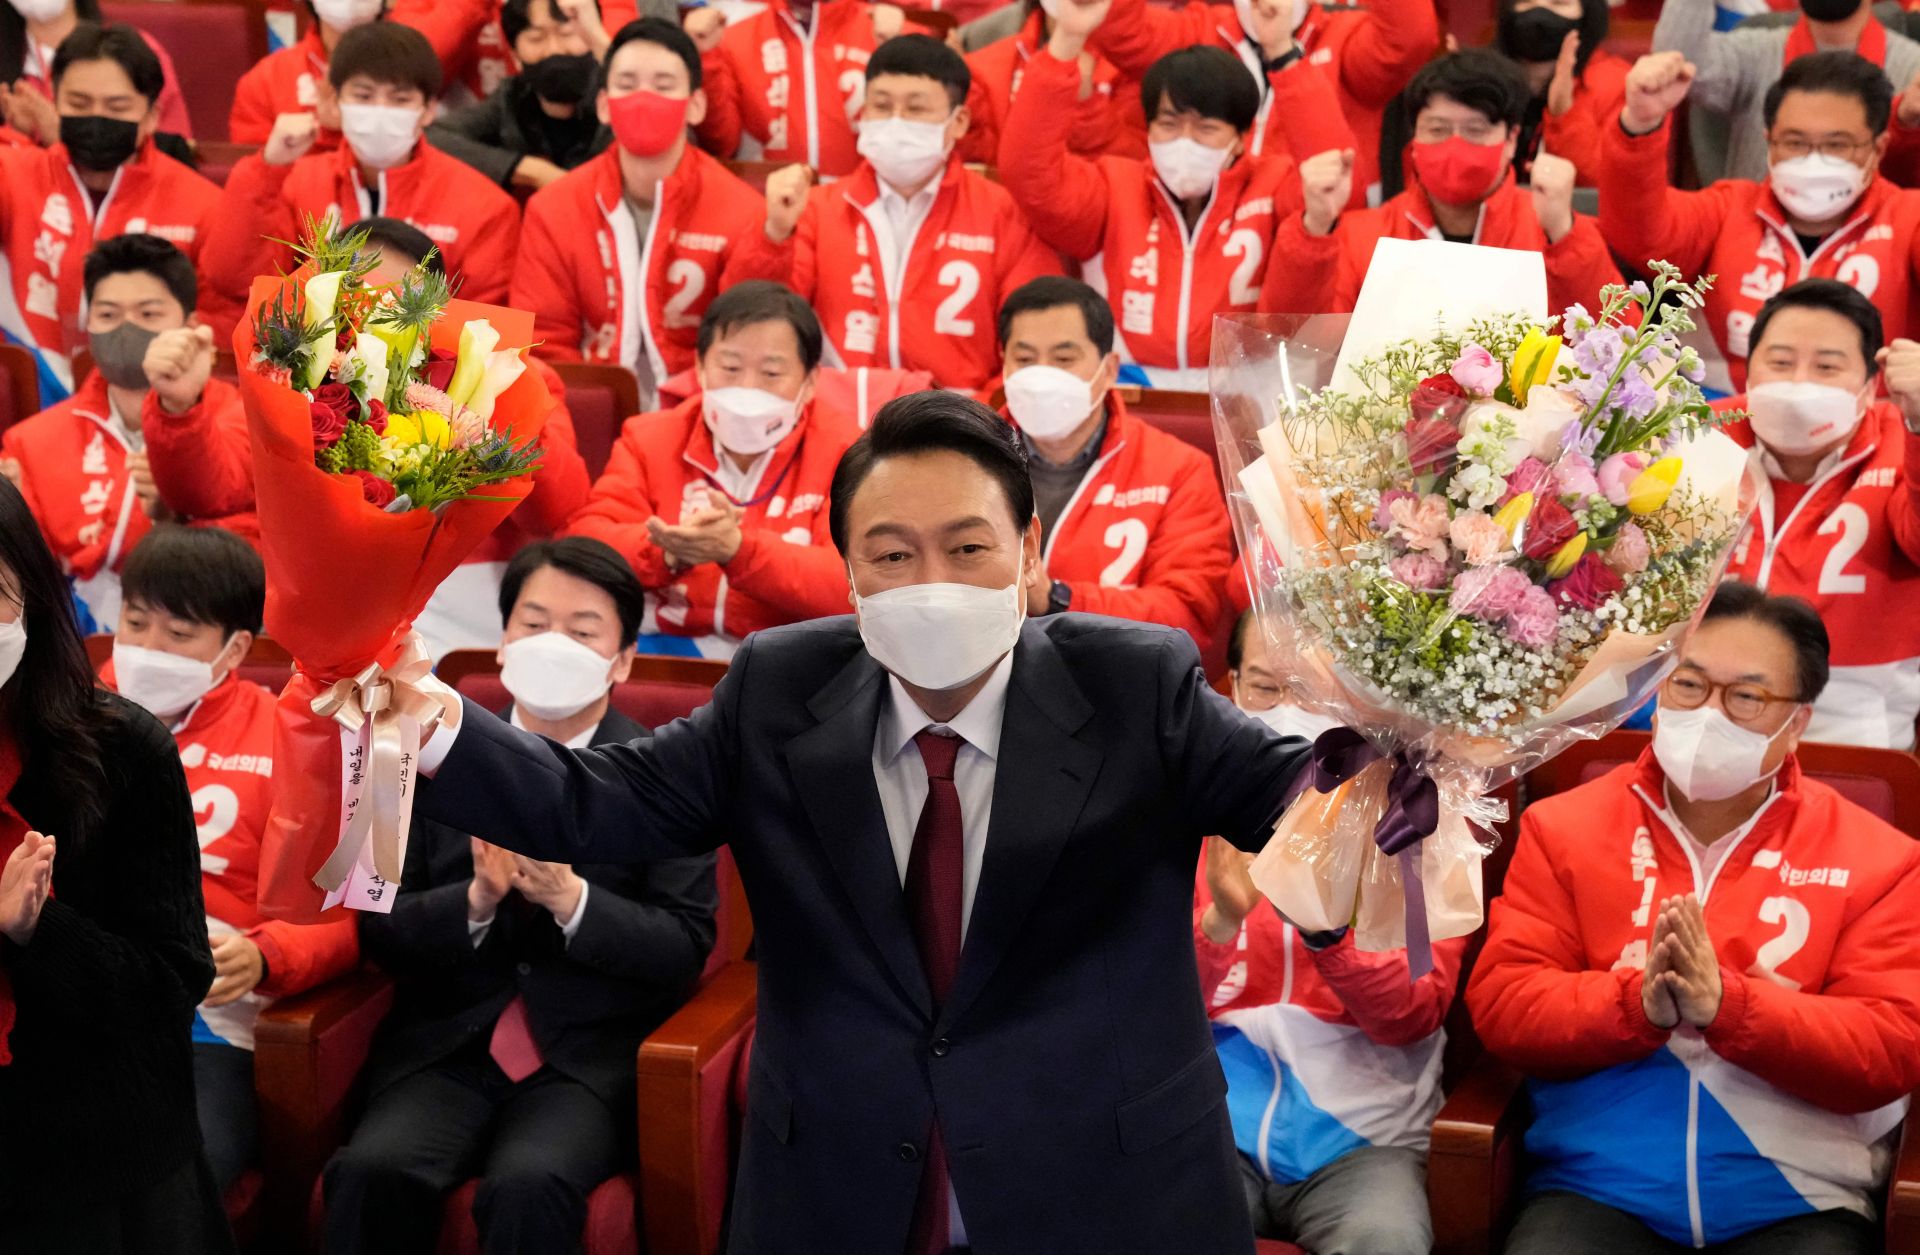 South Korean President-elect Yoon Suk Yeol holds bouquets as he is congratulated by members of his People Power Party at the National Assembly in Seoul, South Korea, on March 10, 2022.